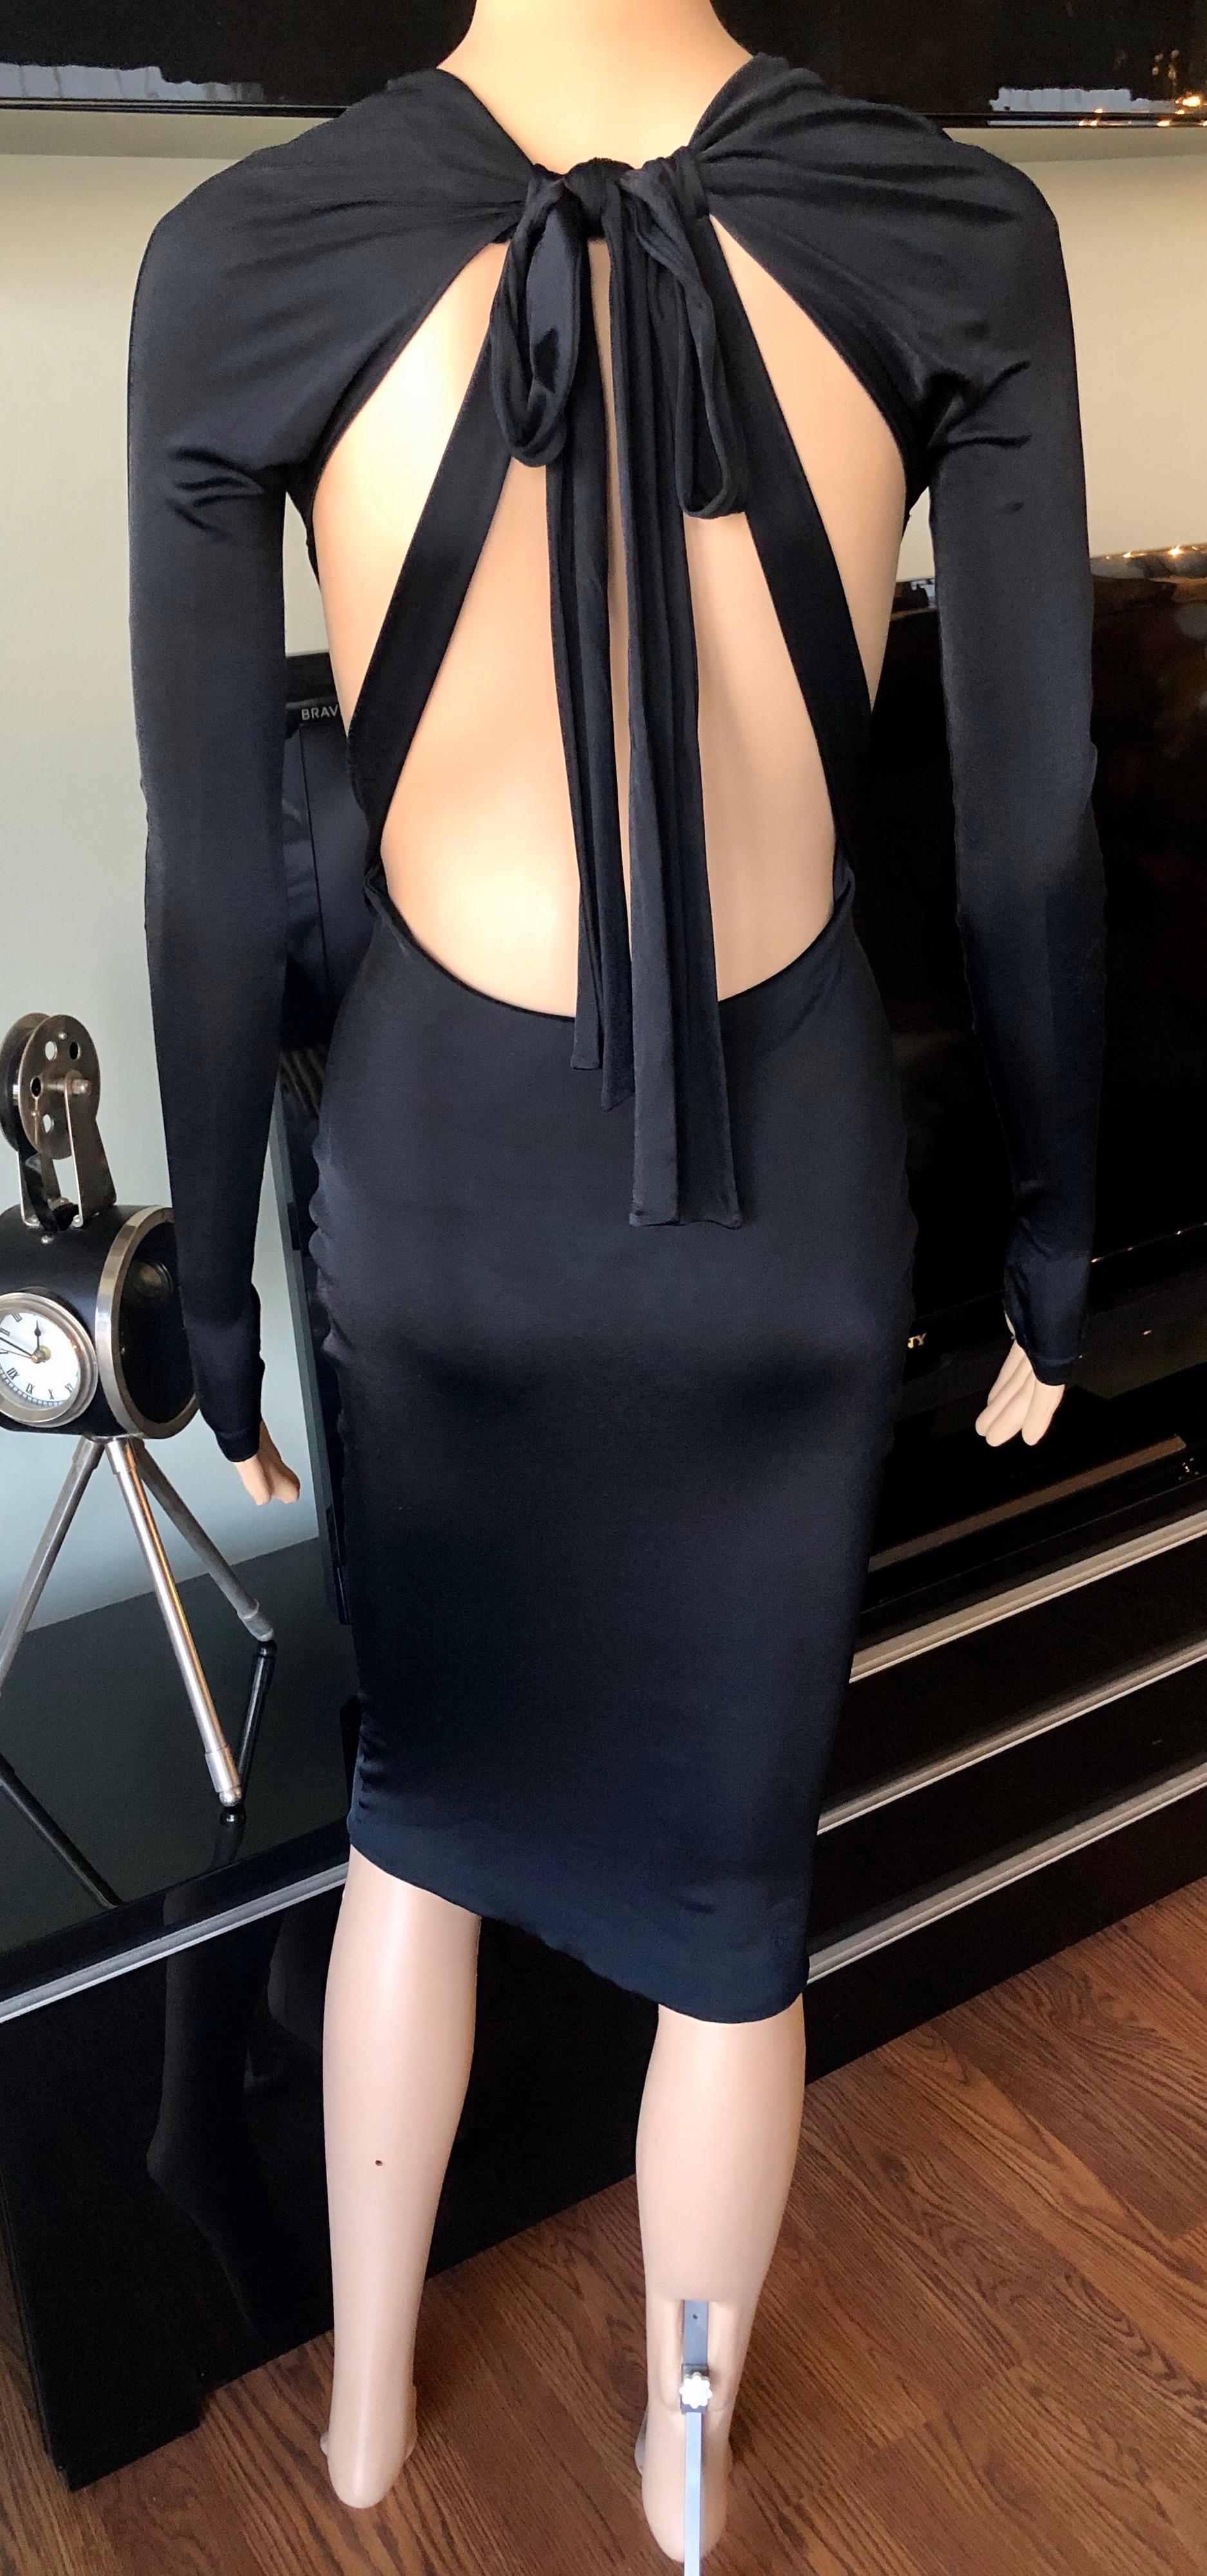 Gucci S/S 2005 Tom Ford Plunging Cutout Backless Bodycon Black Dress en vente 3